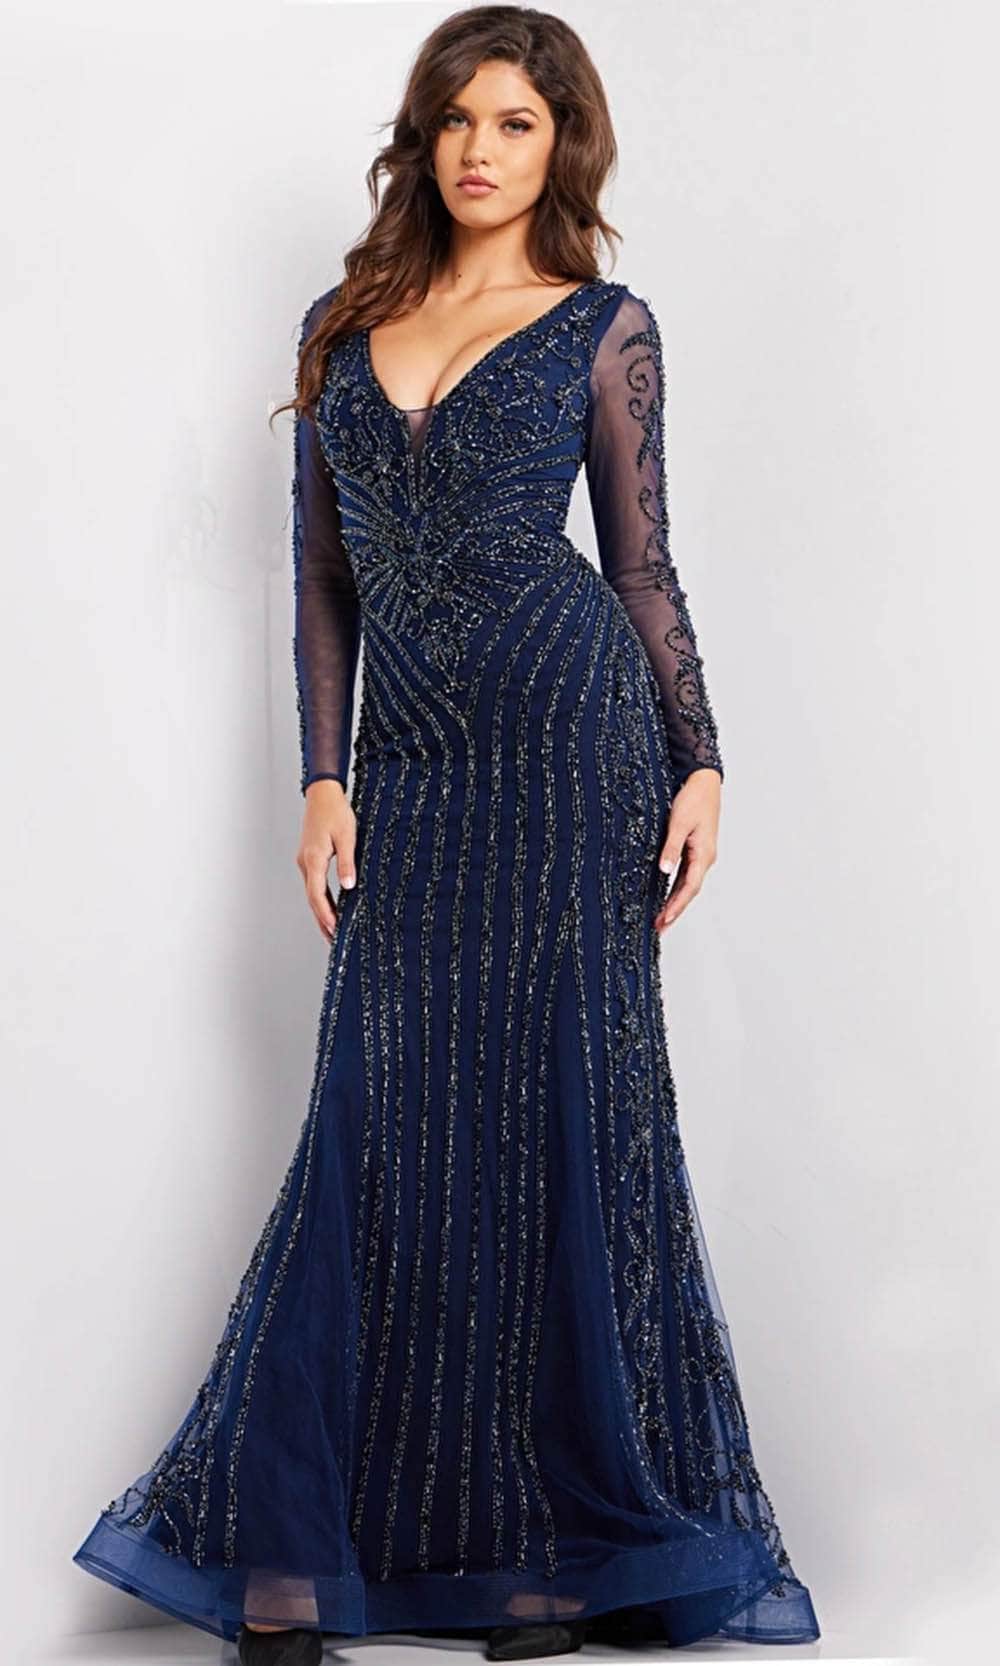 Image of Jovani 24236 - Bead Embellished Evening Gown